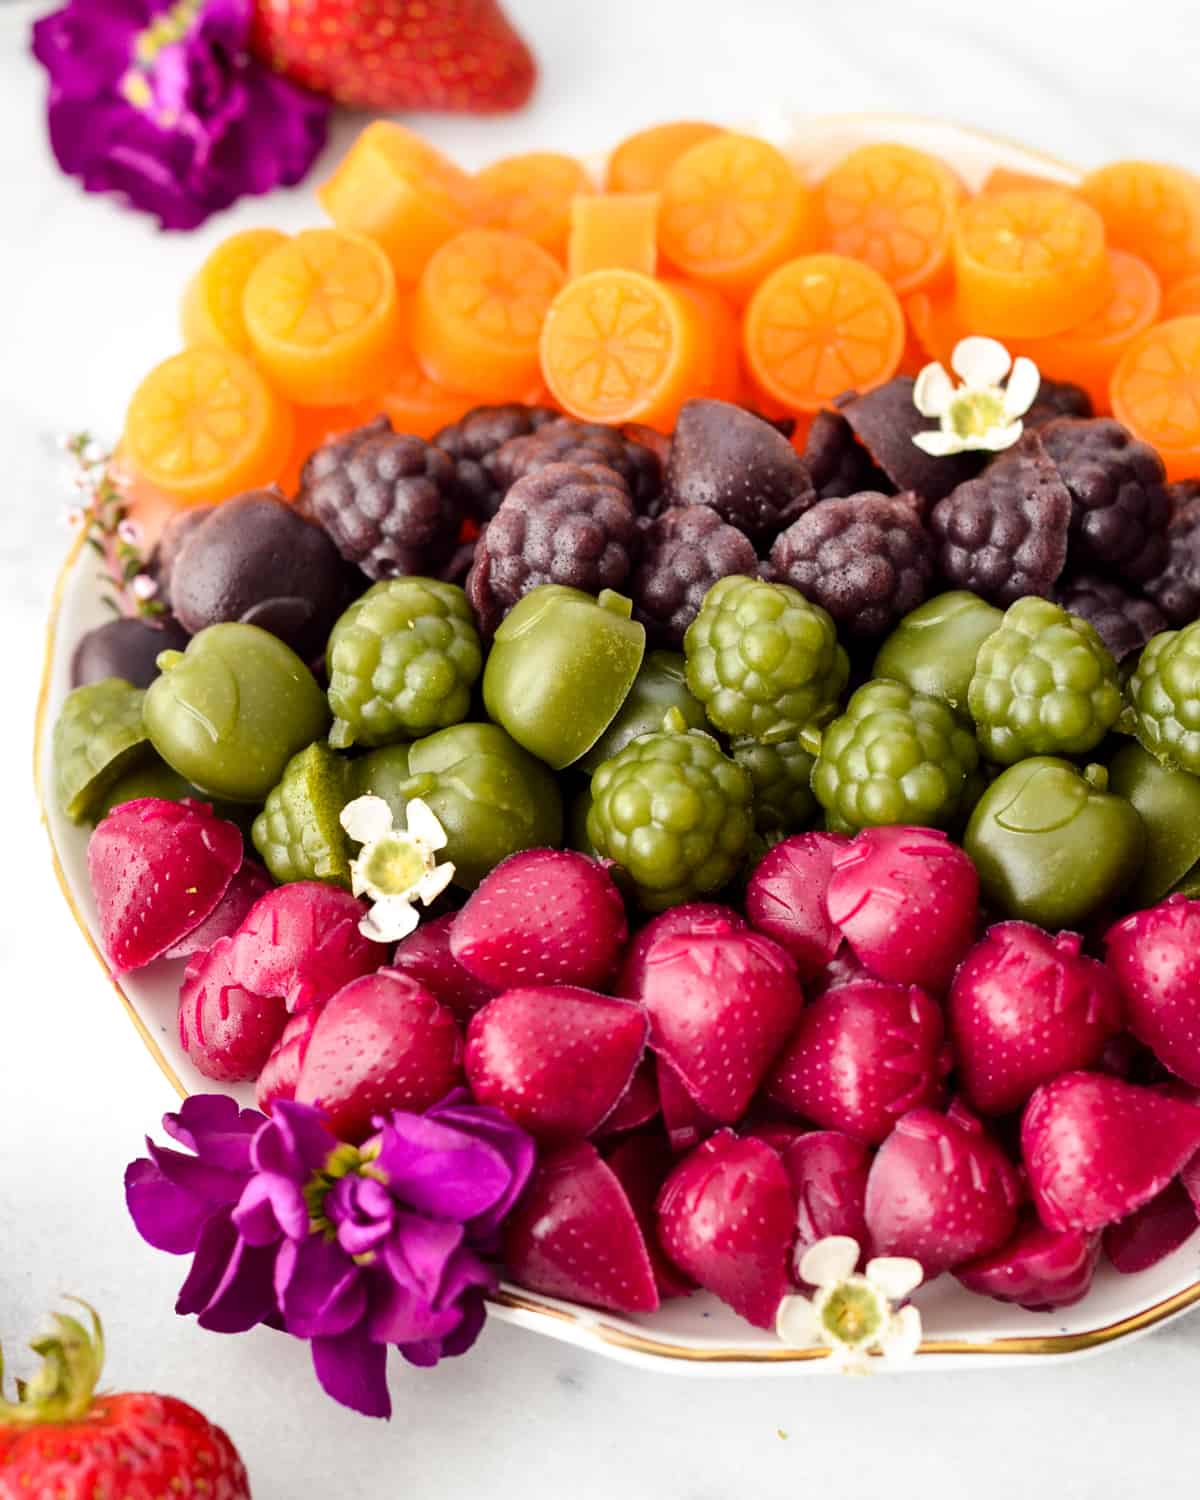 homemade fruit snacks on a plate arranged in colors